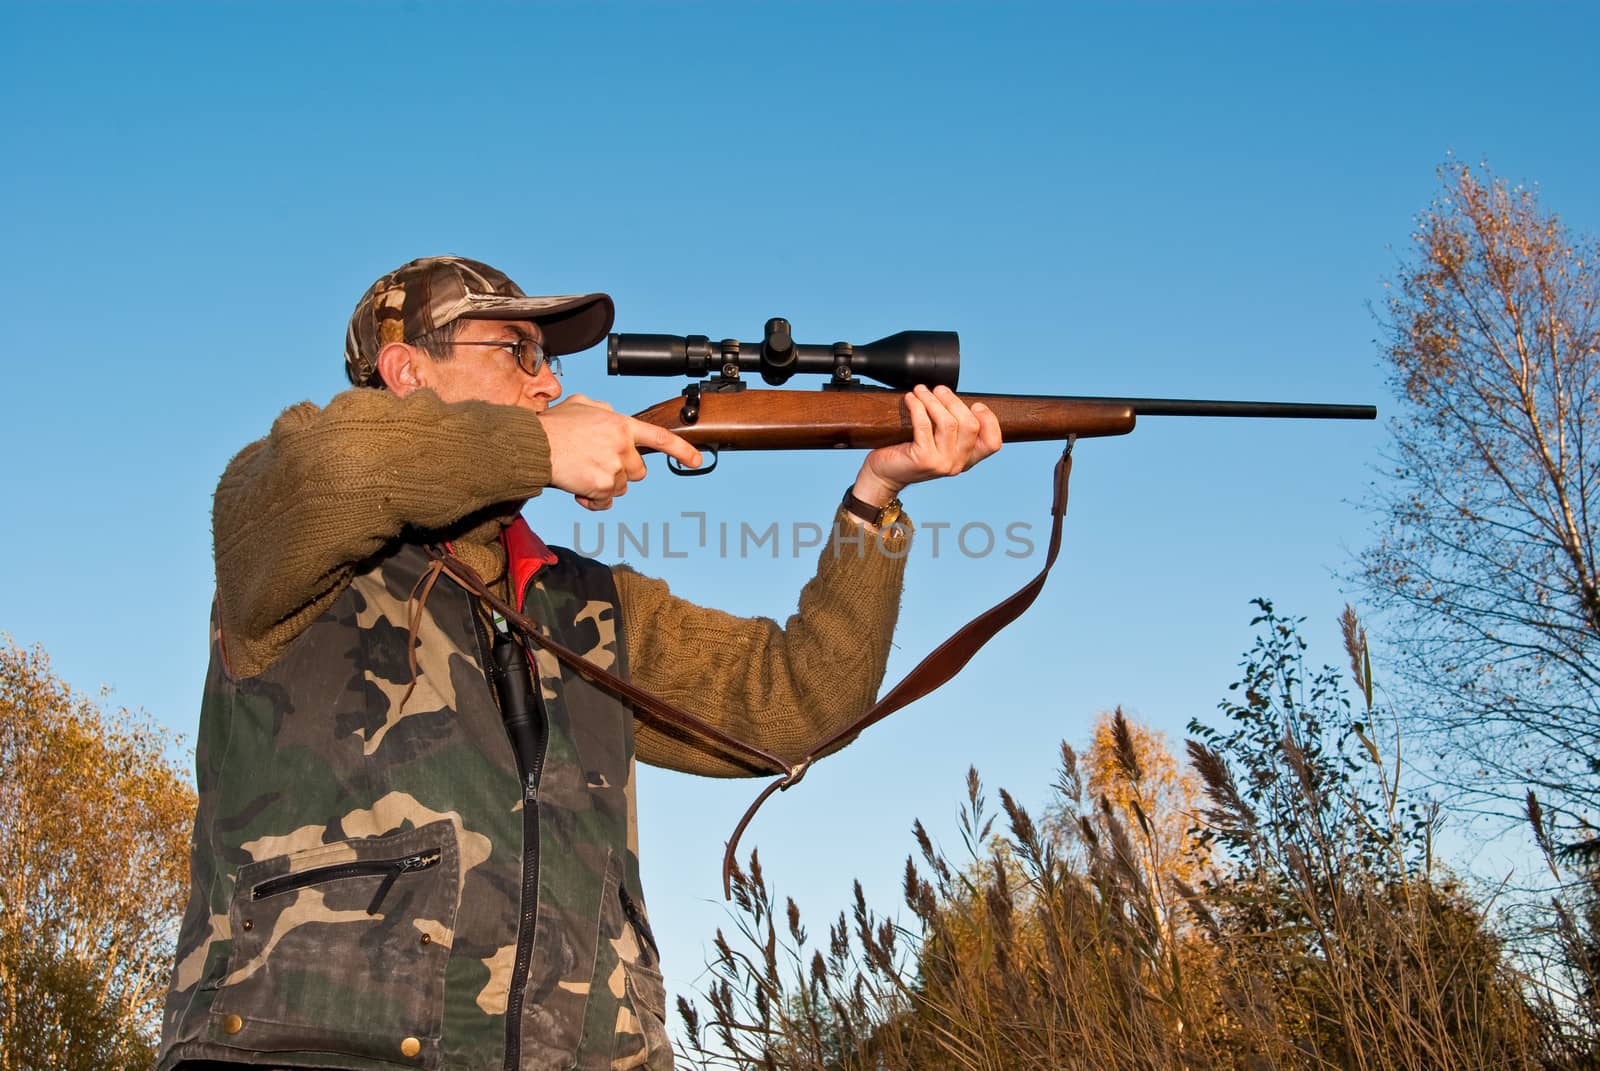 Hunter aiming mooses with telescopic sights on rifl